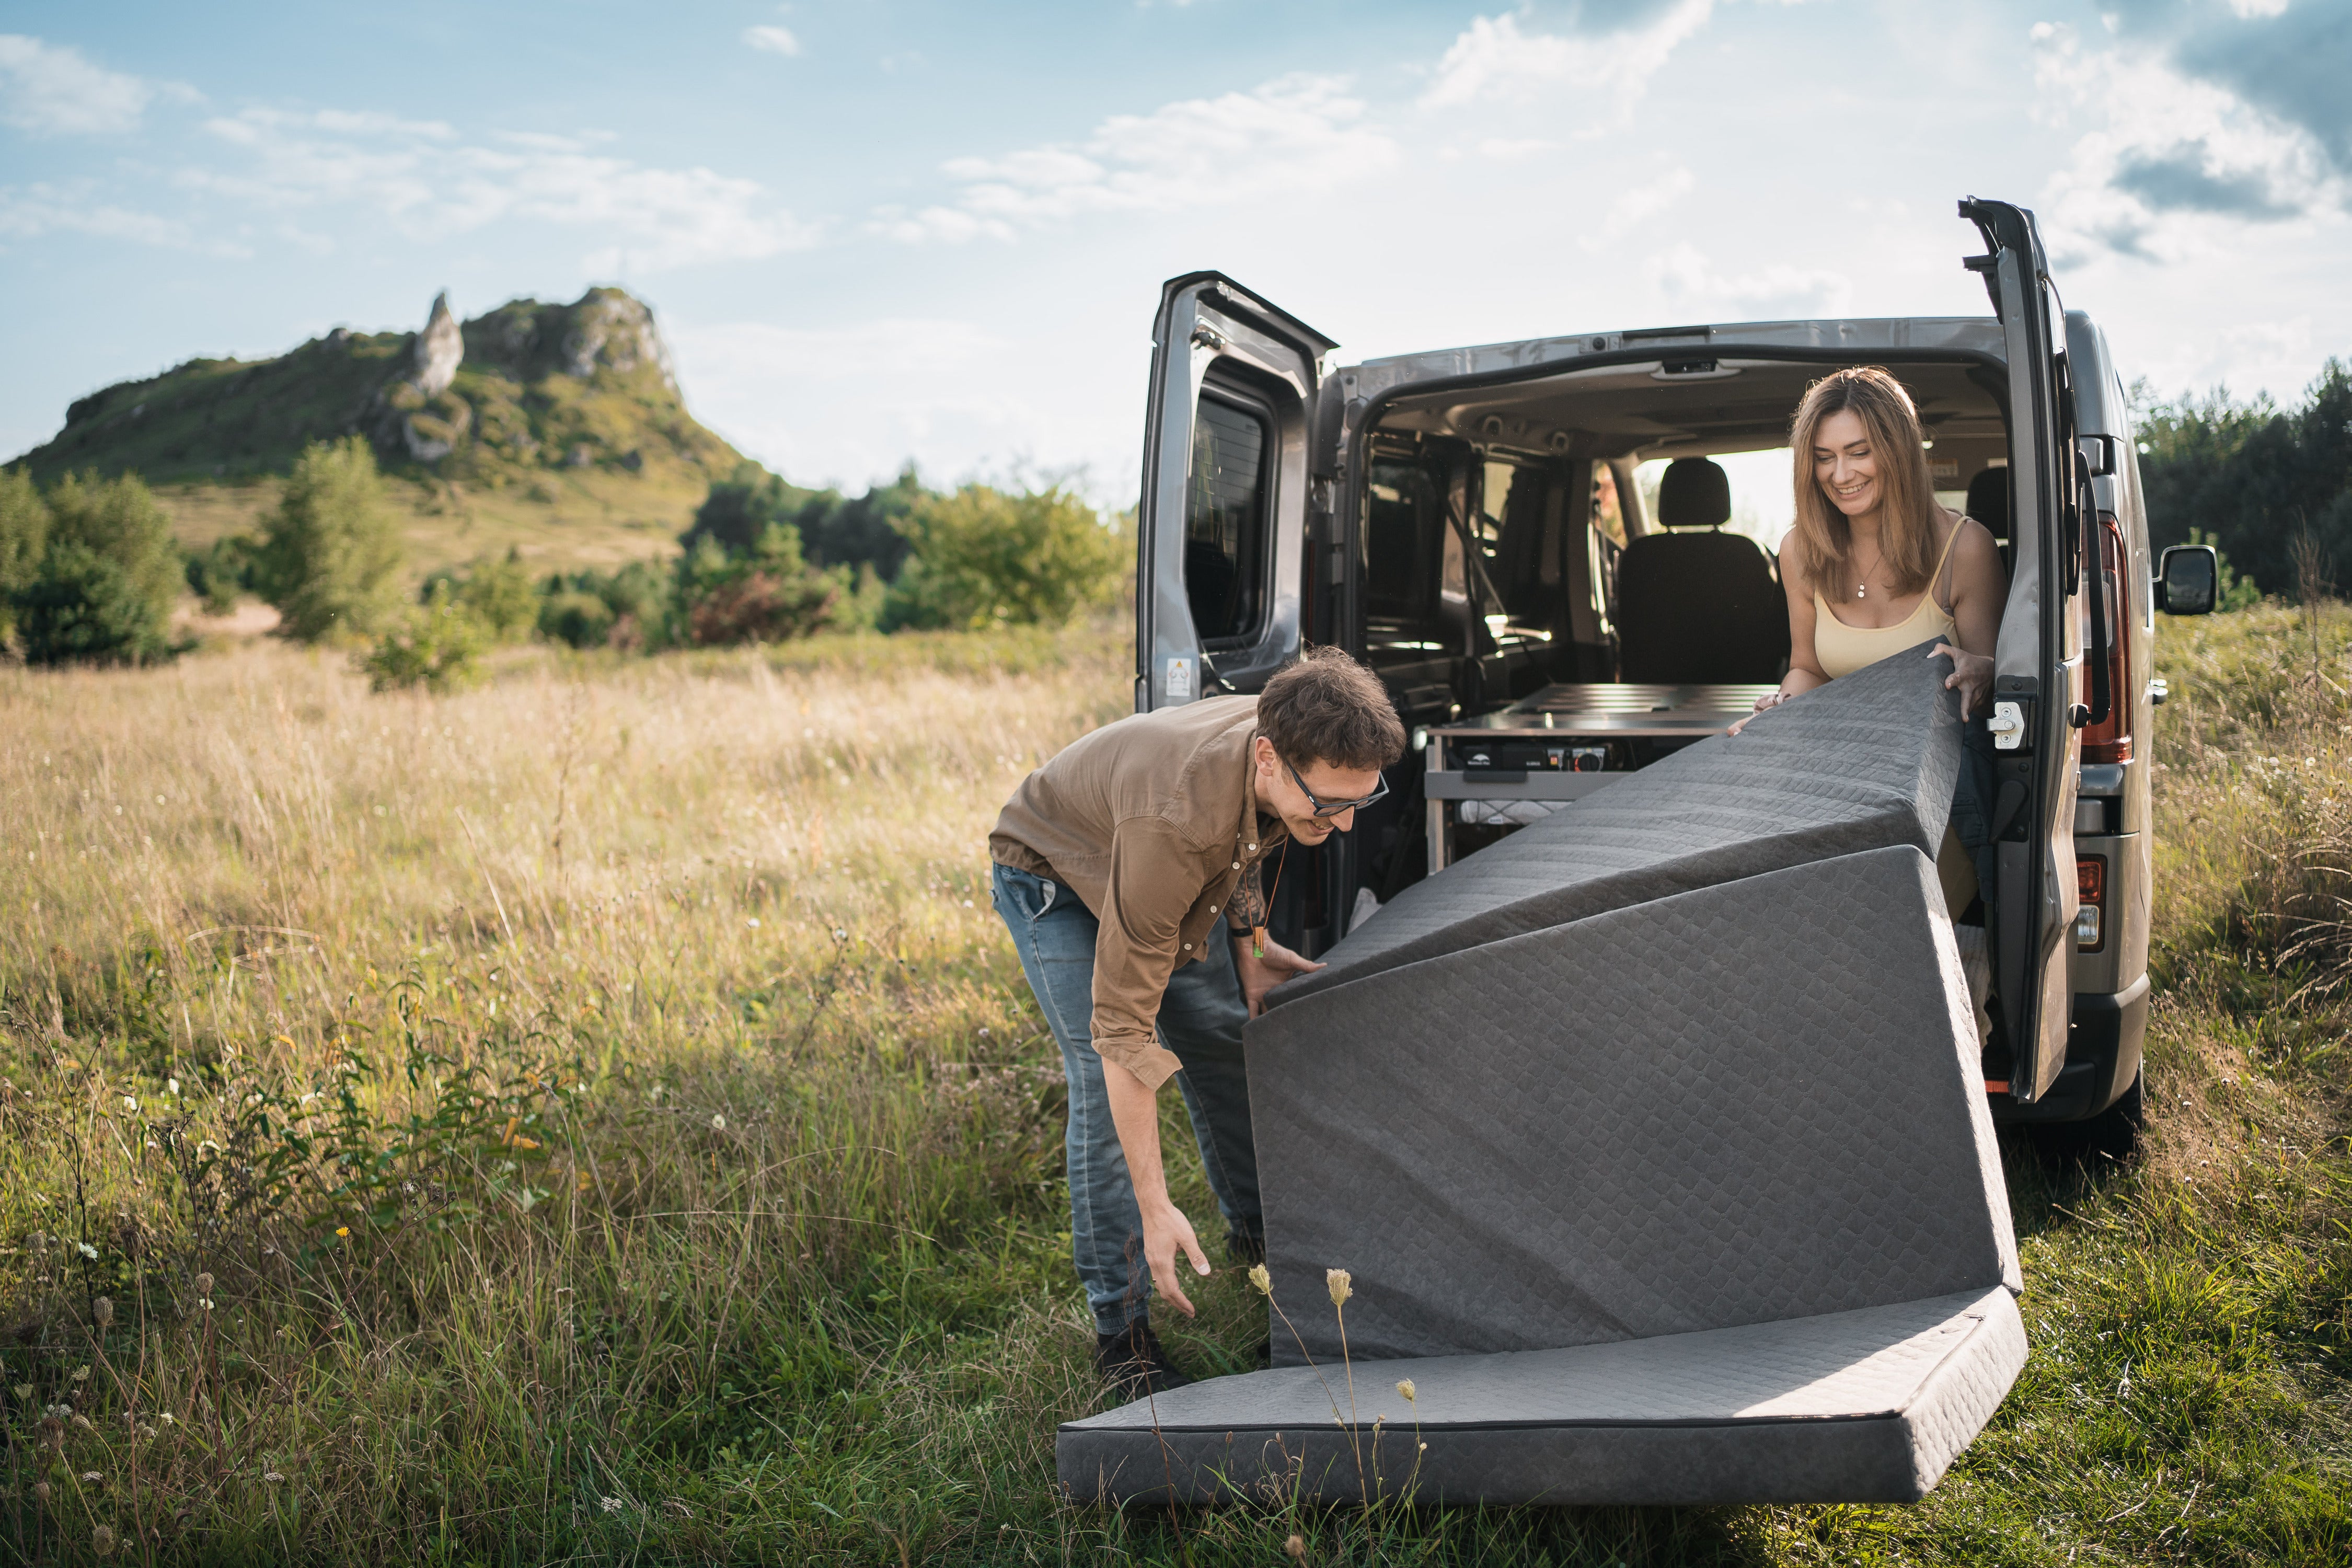 RAXO Base Campervan Module - Transform your car into a comfortable and functional campervan